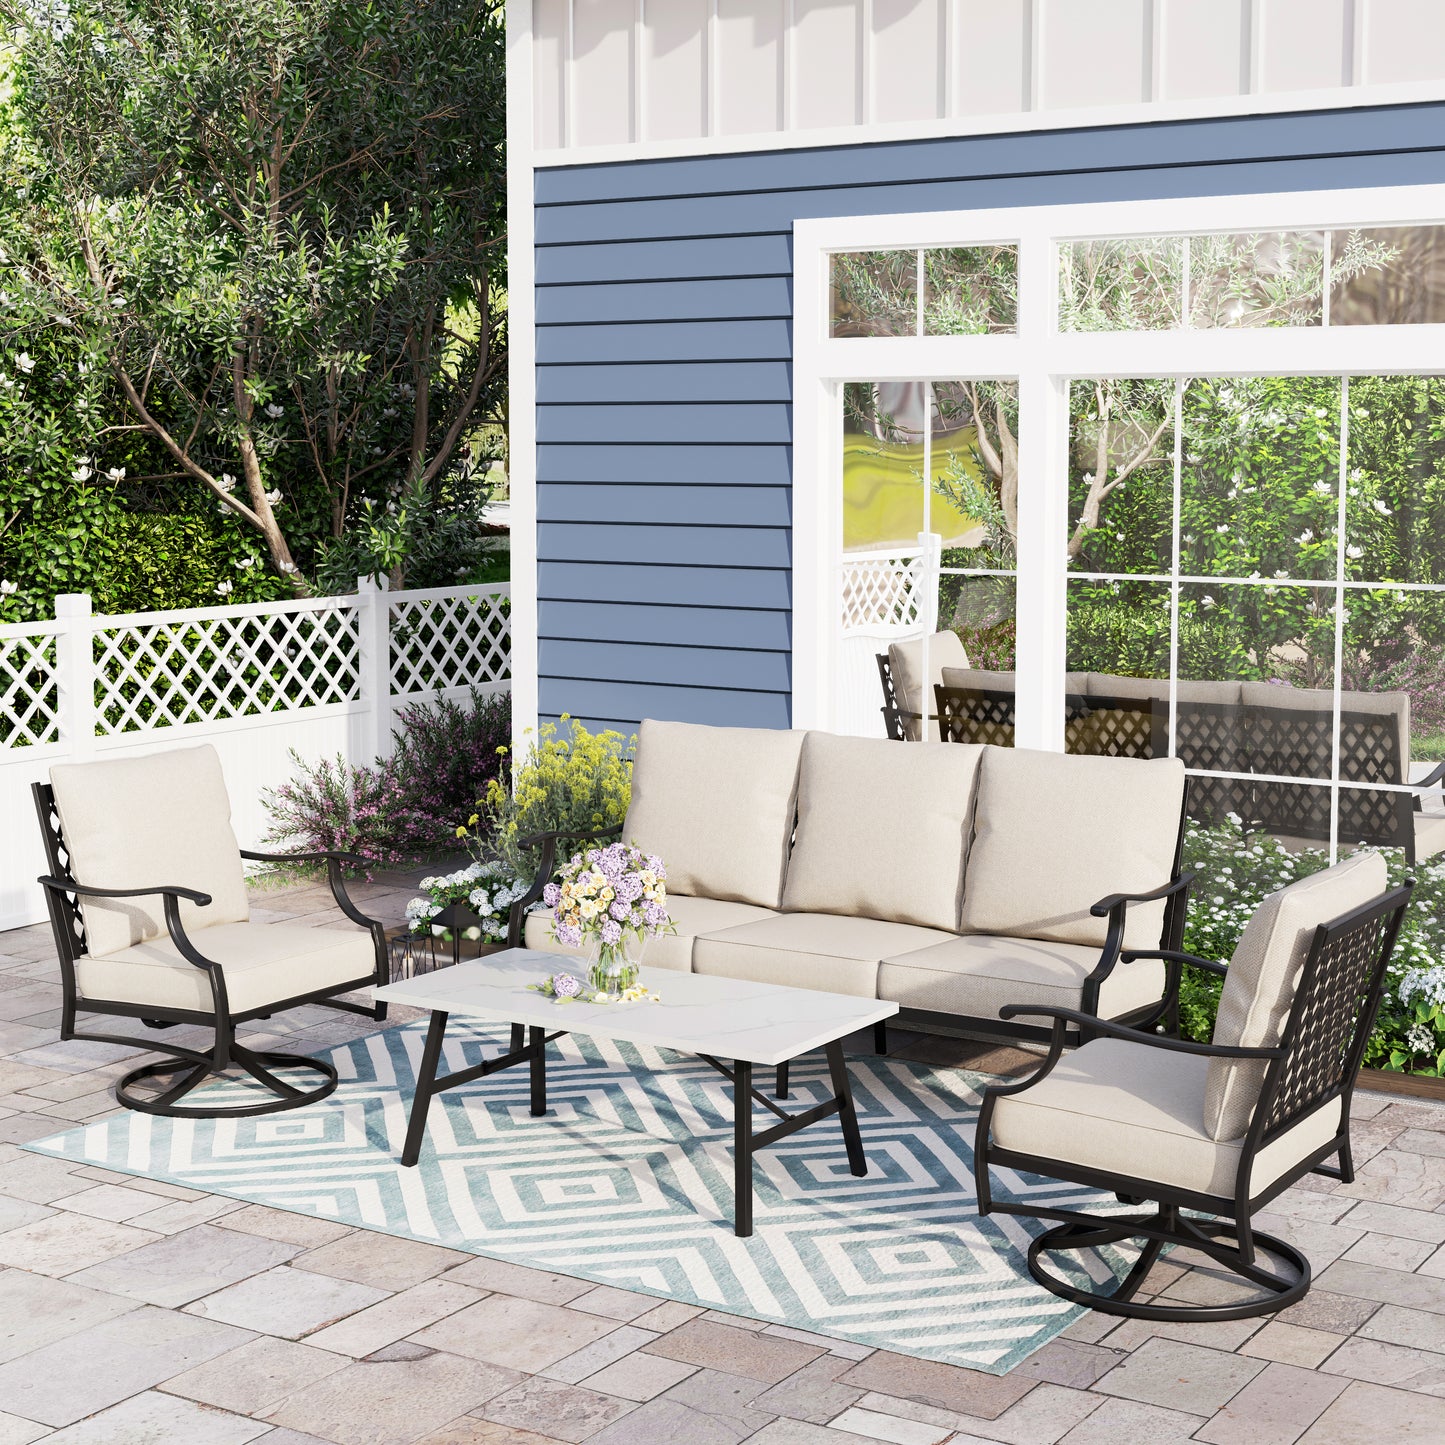 Sophia&William 5 Seat Outdoor Conversation Set Patio Table and Chairs Sets with Cushions and Pillows